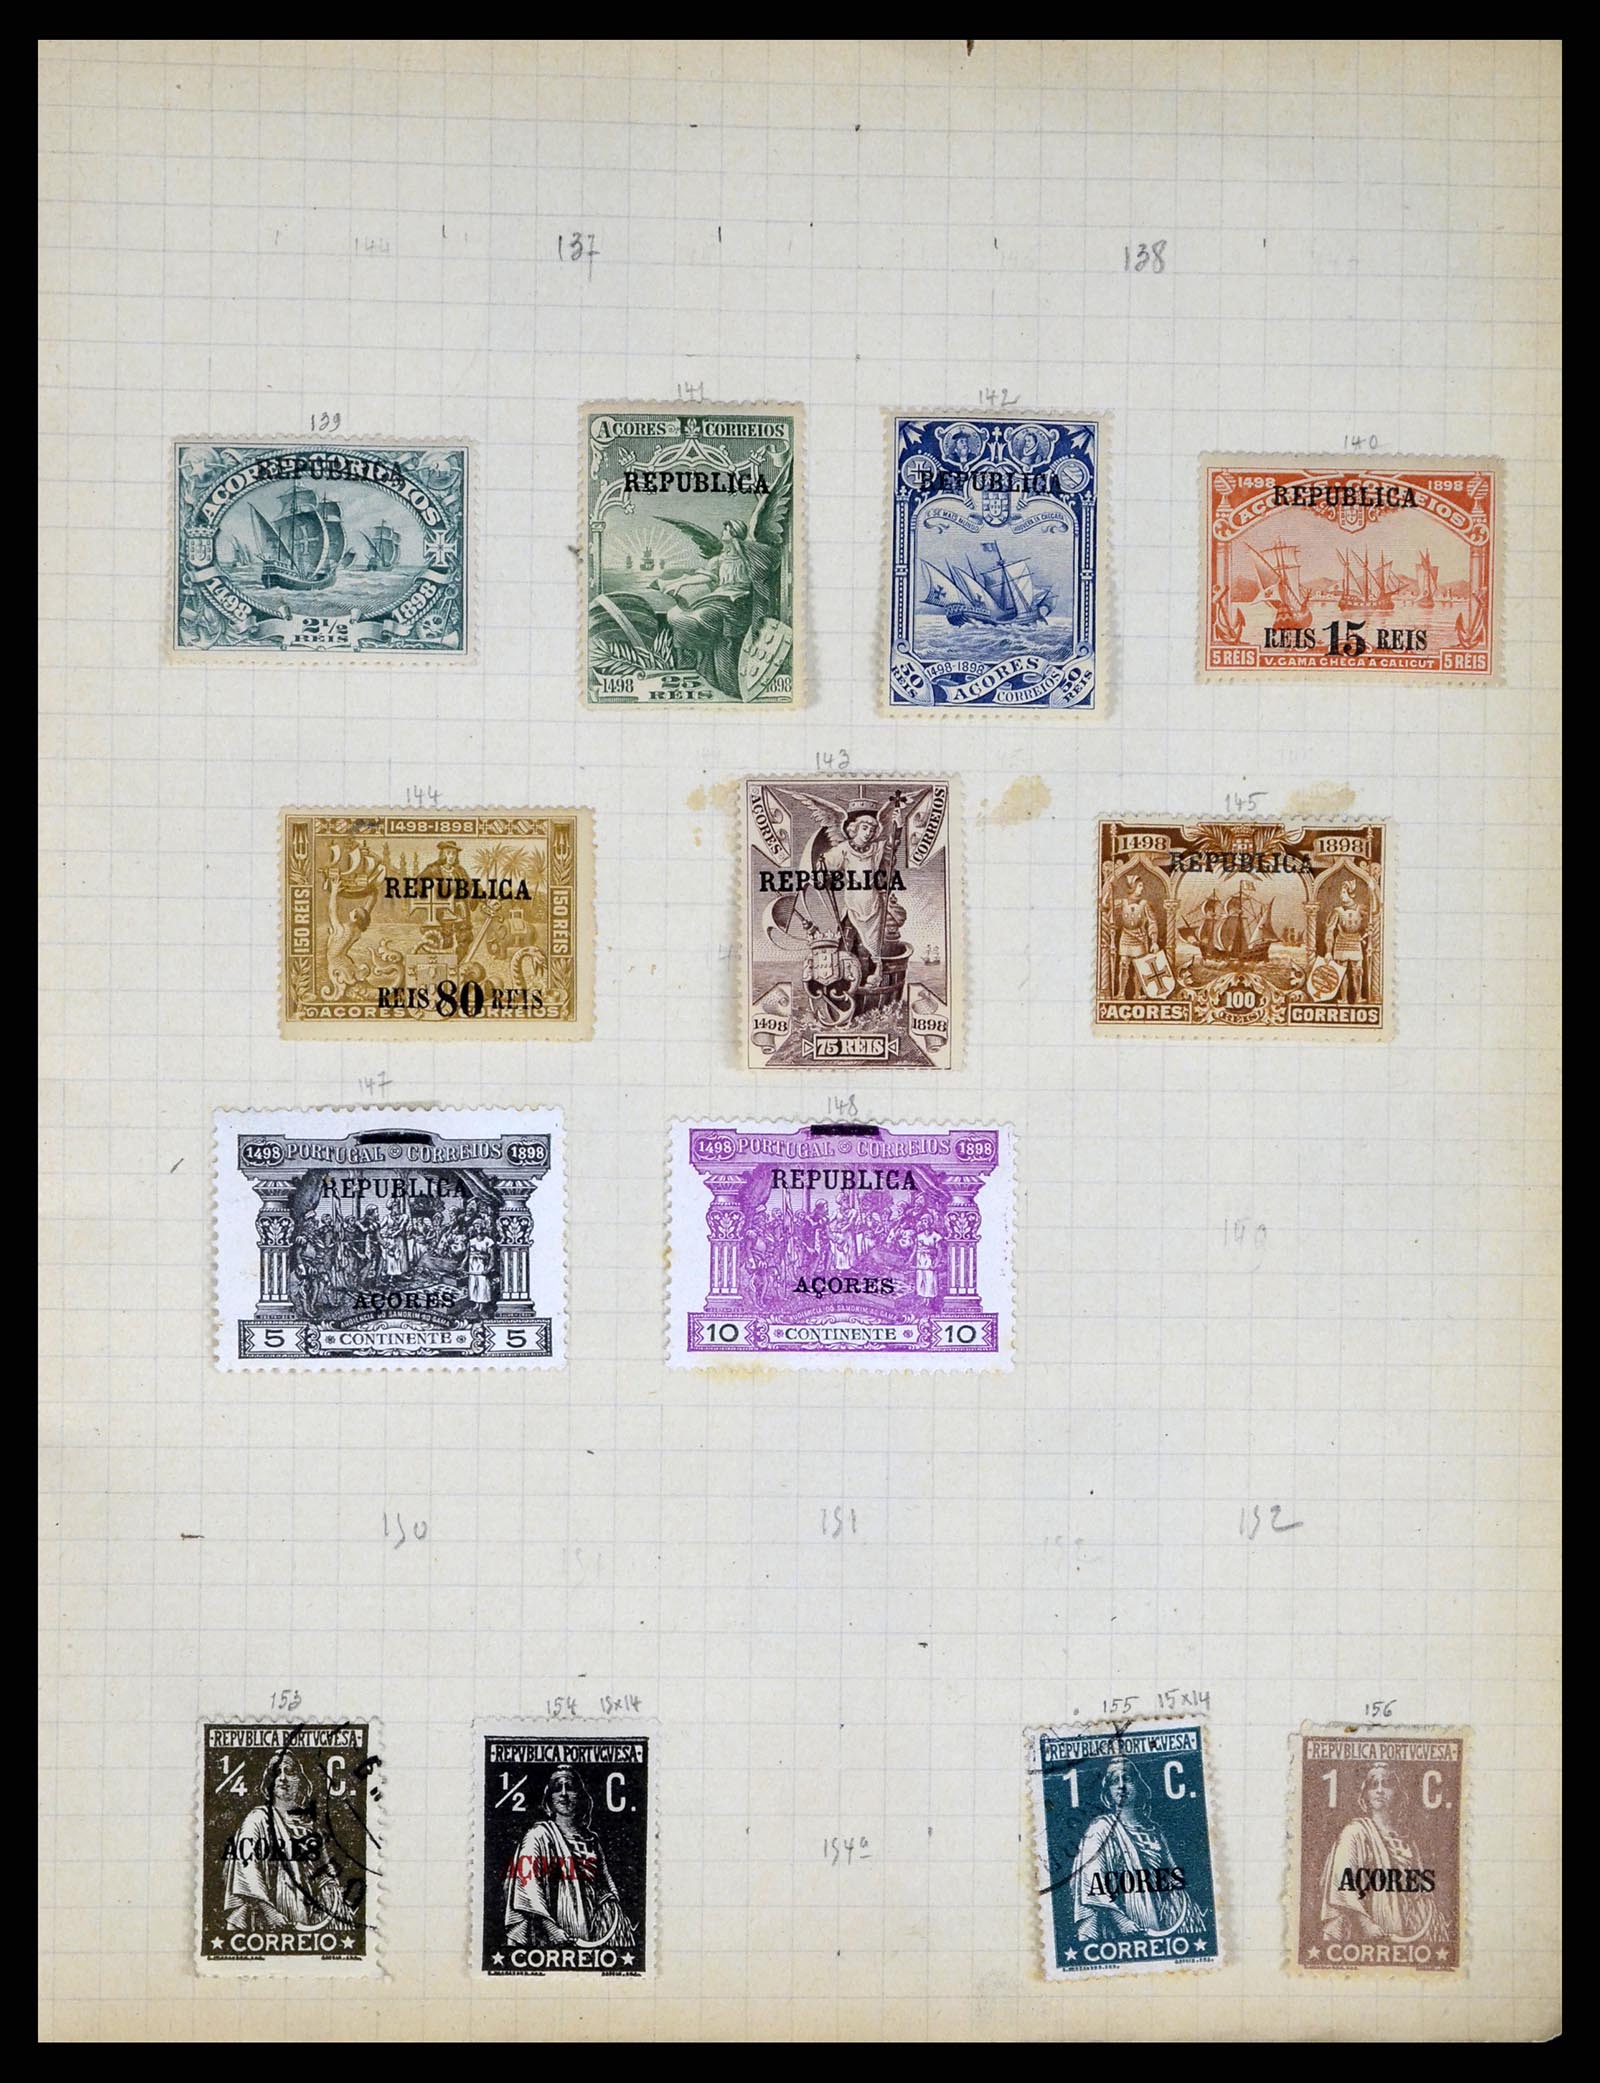 37280 087 - Stamp collection 37280 World classic 1840-1900.